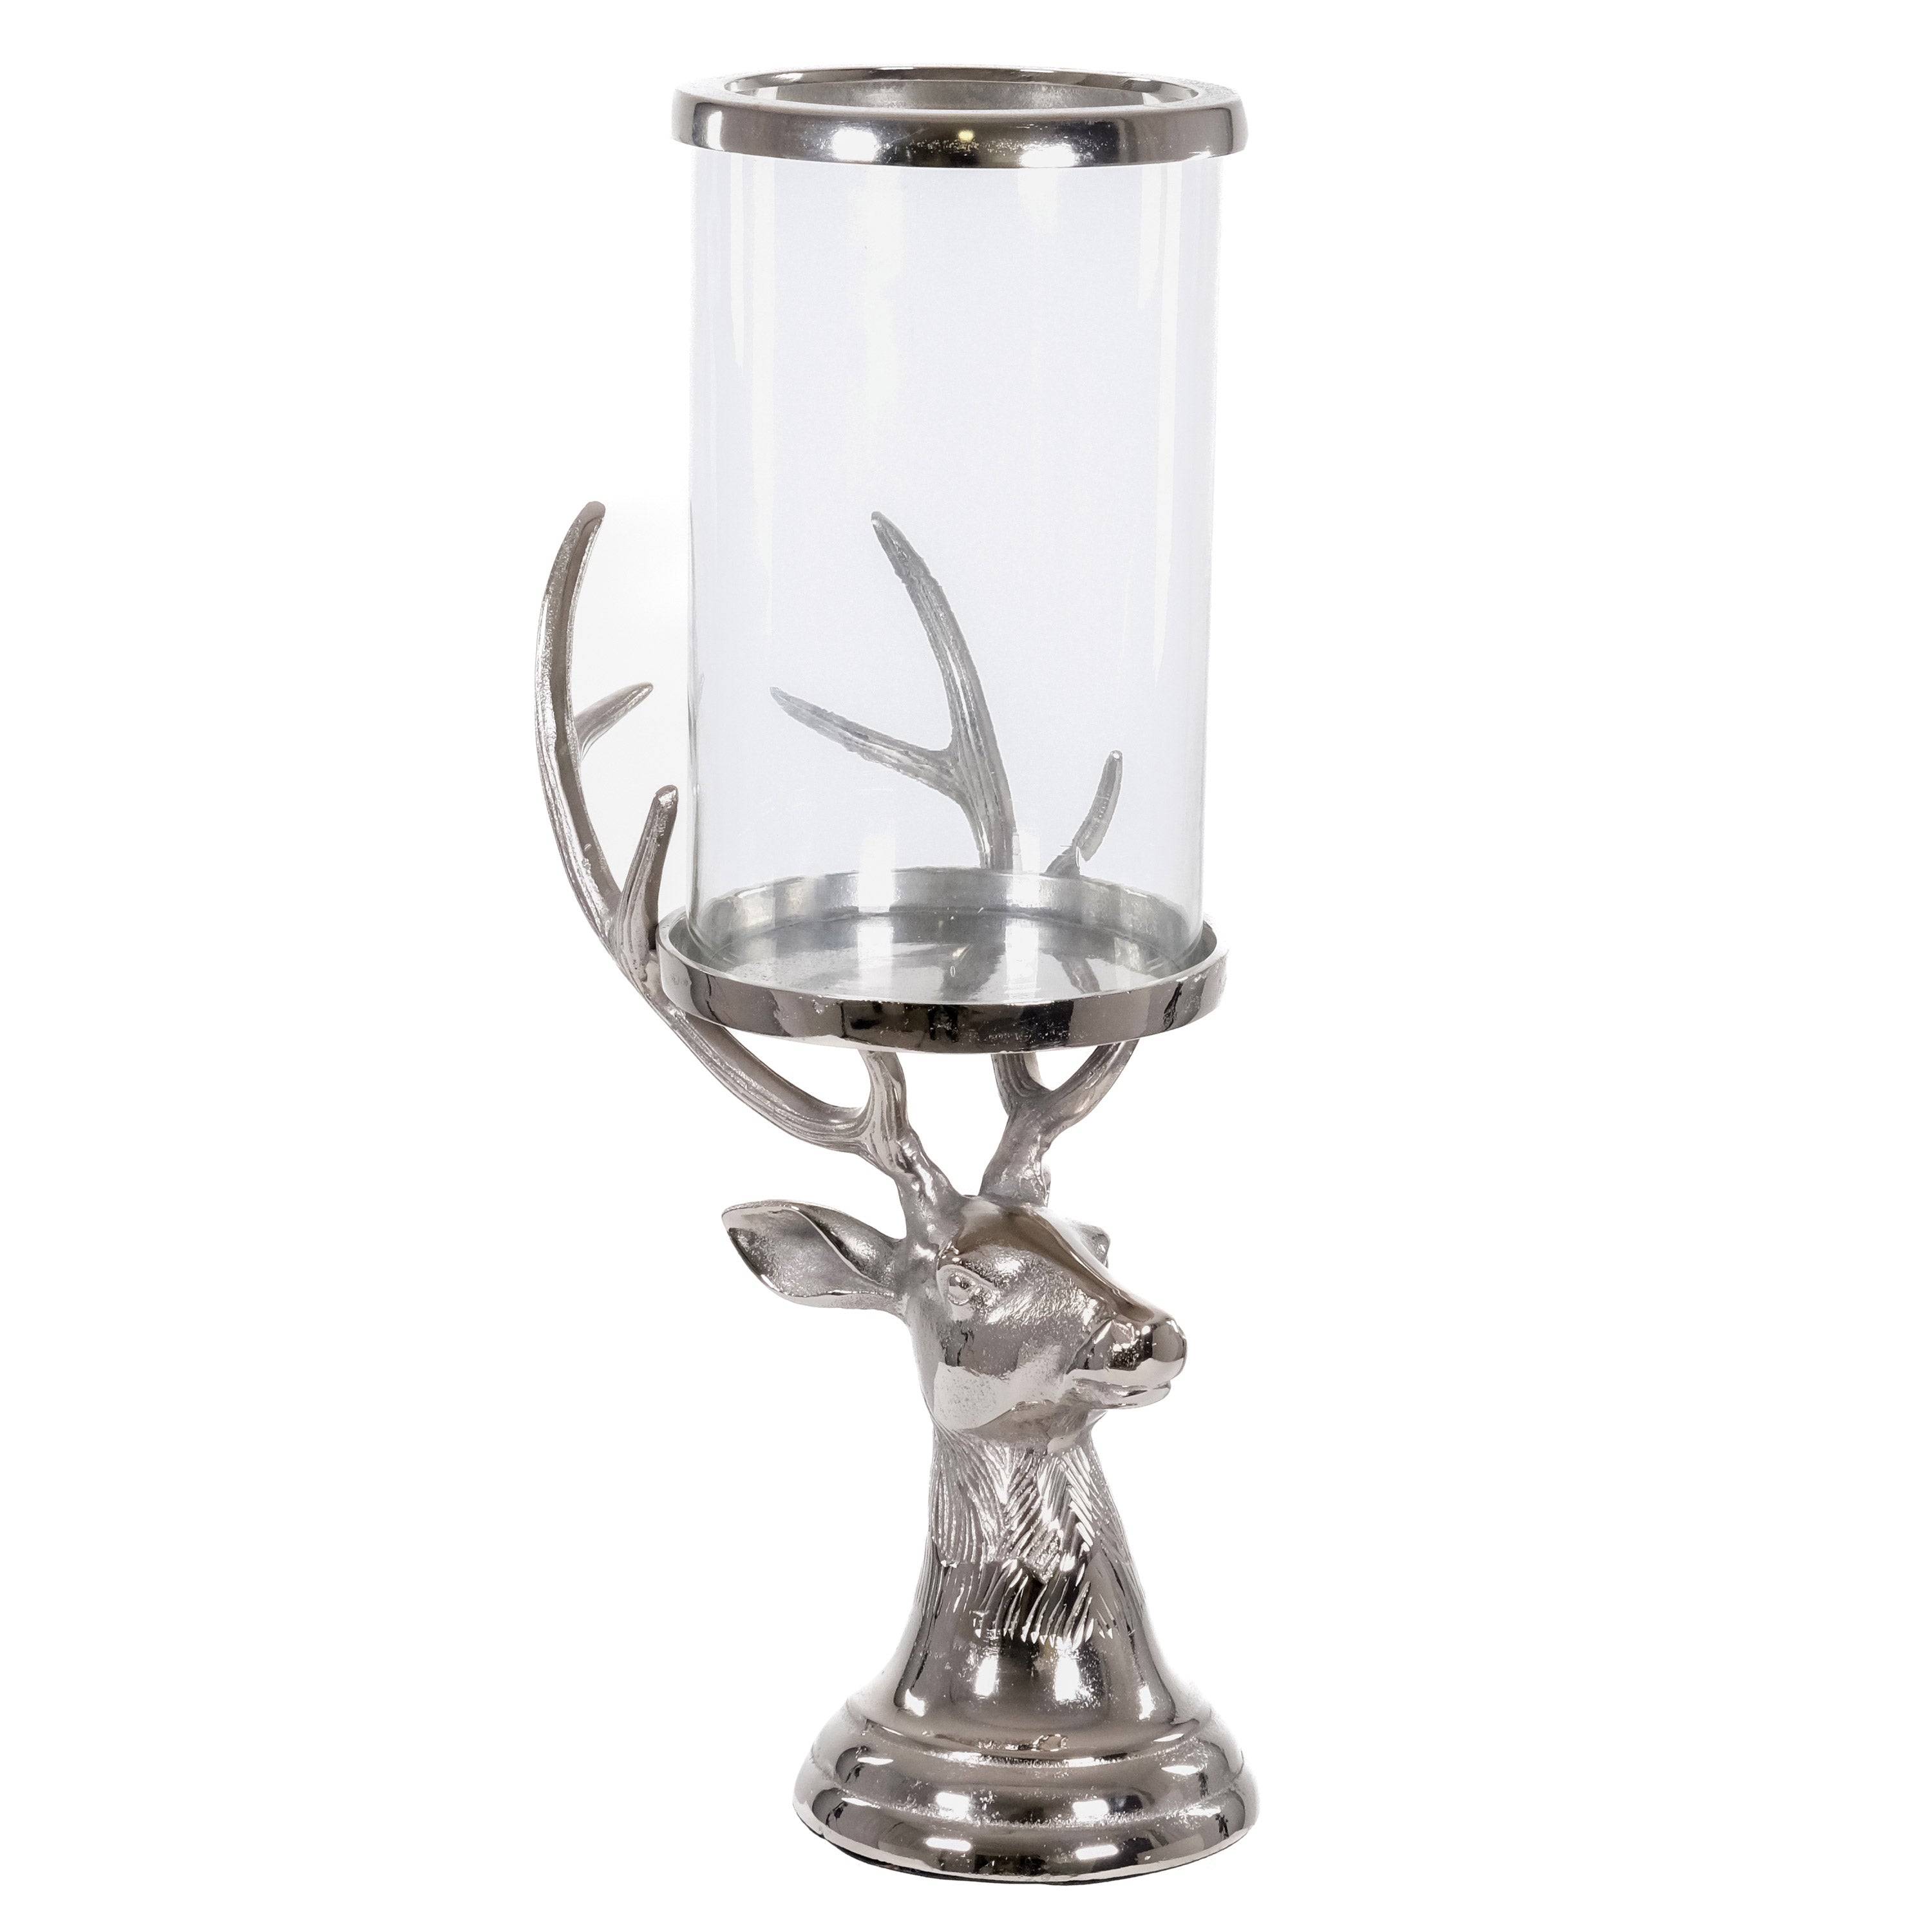 View Silver Stag Candle Hurricane Lantern information